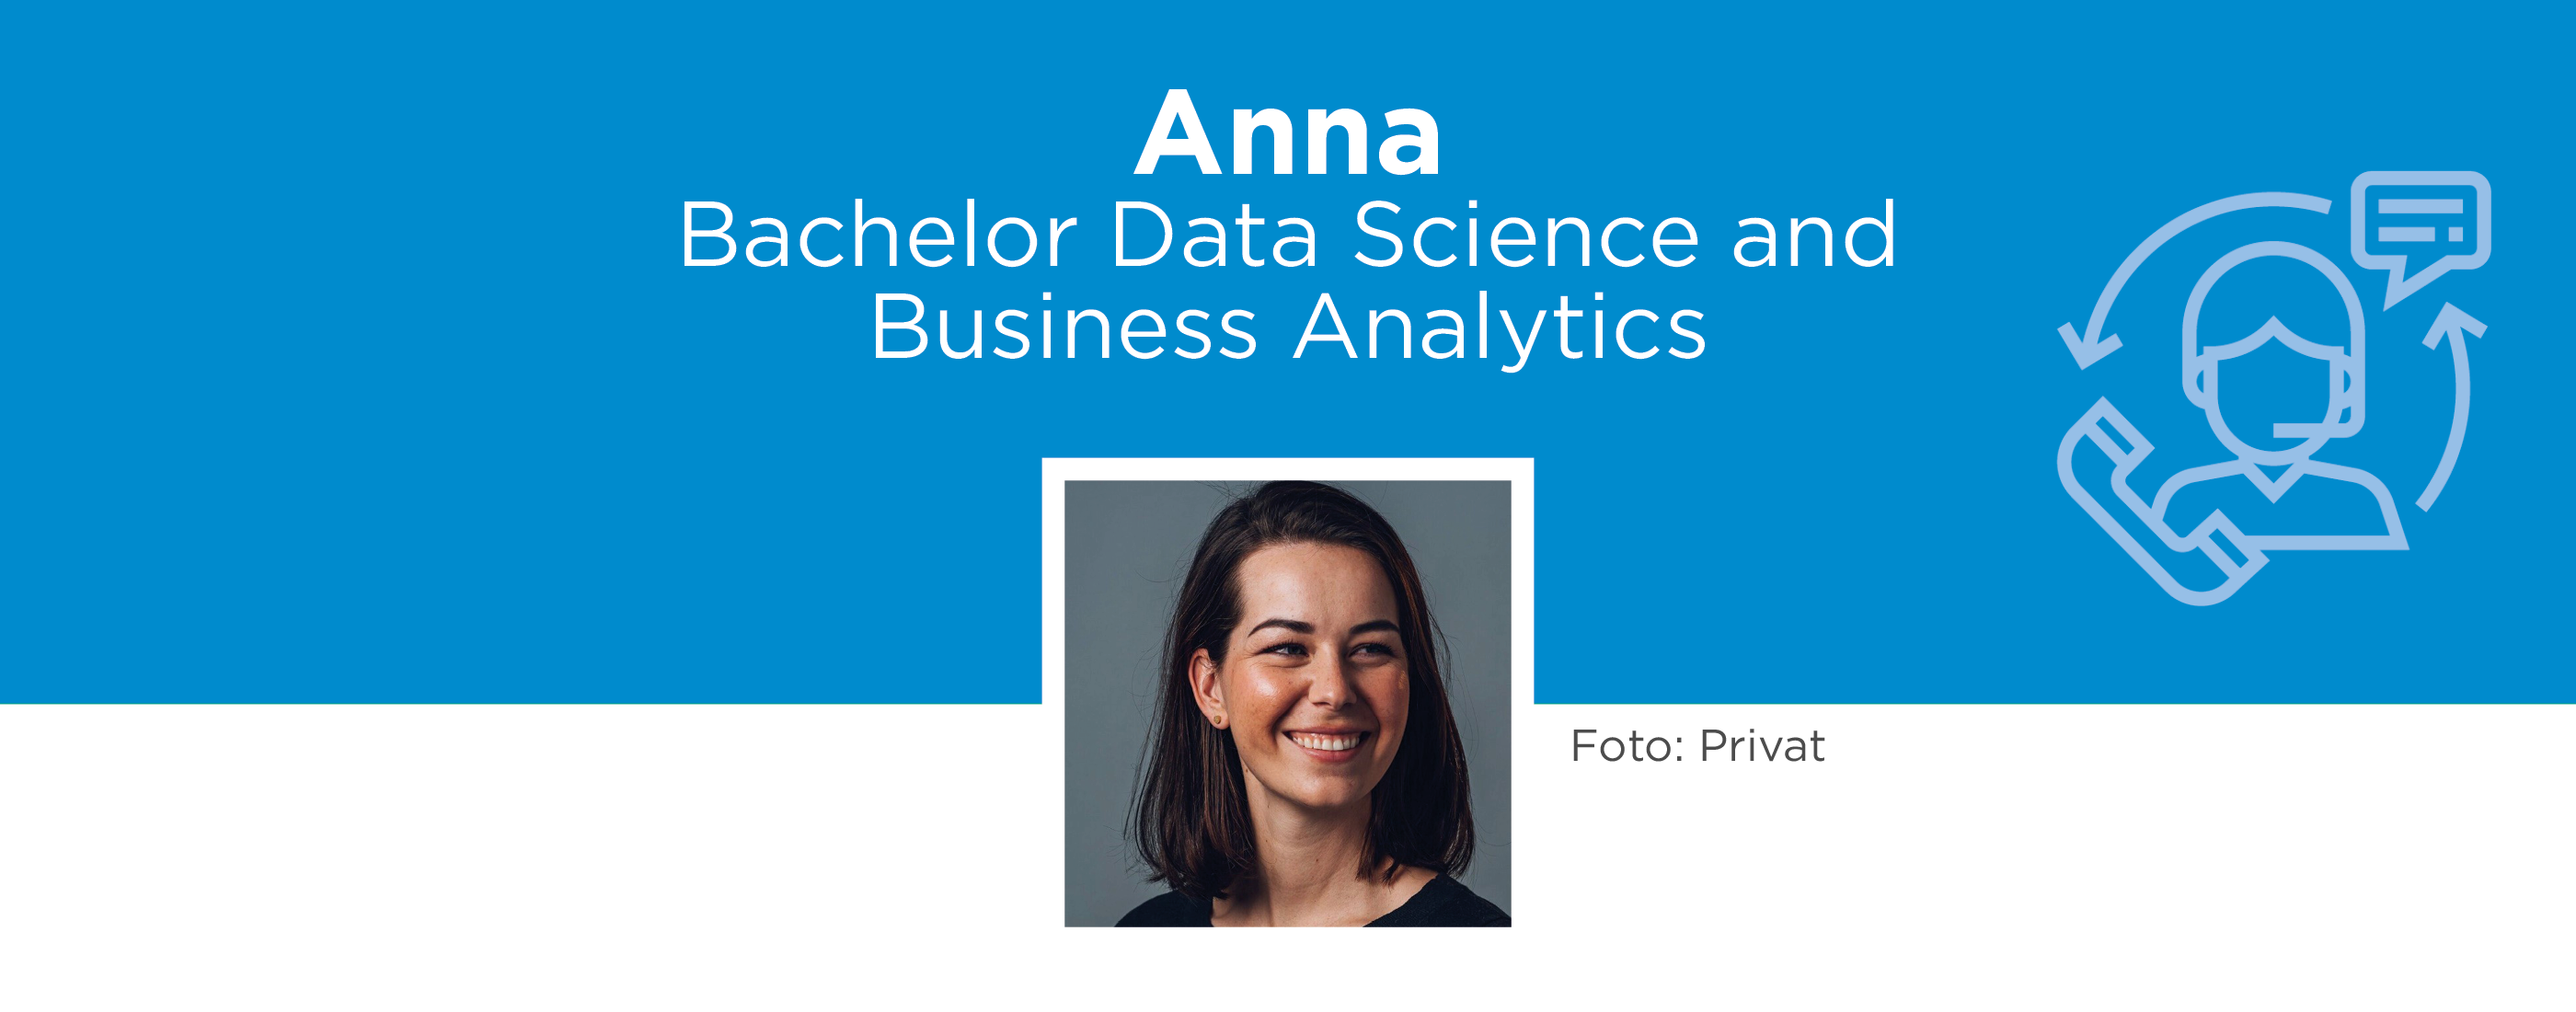 Anna: Bachelor Data Science and Business Communications